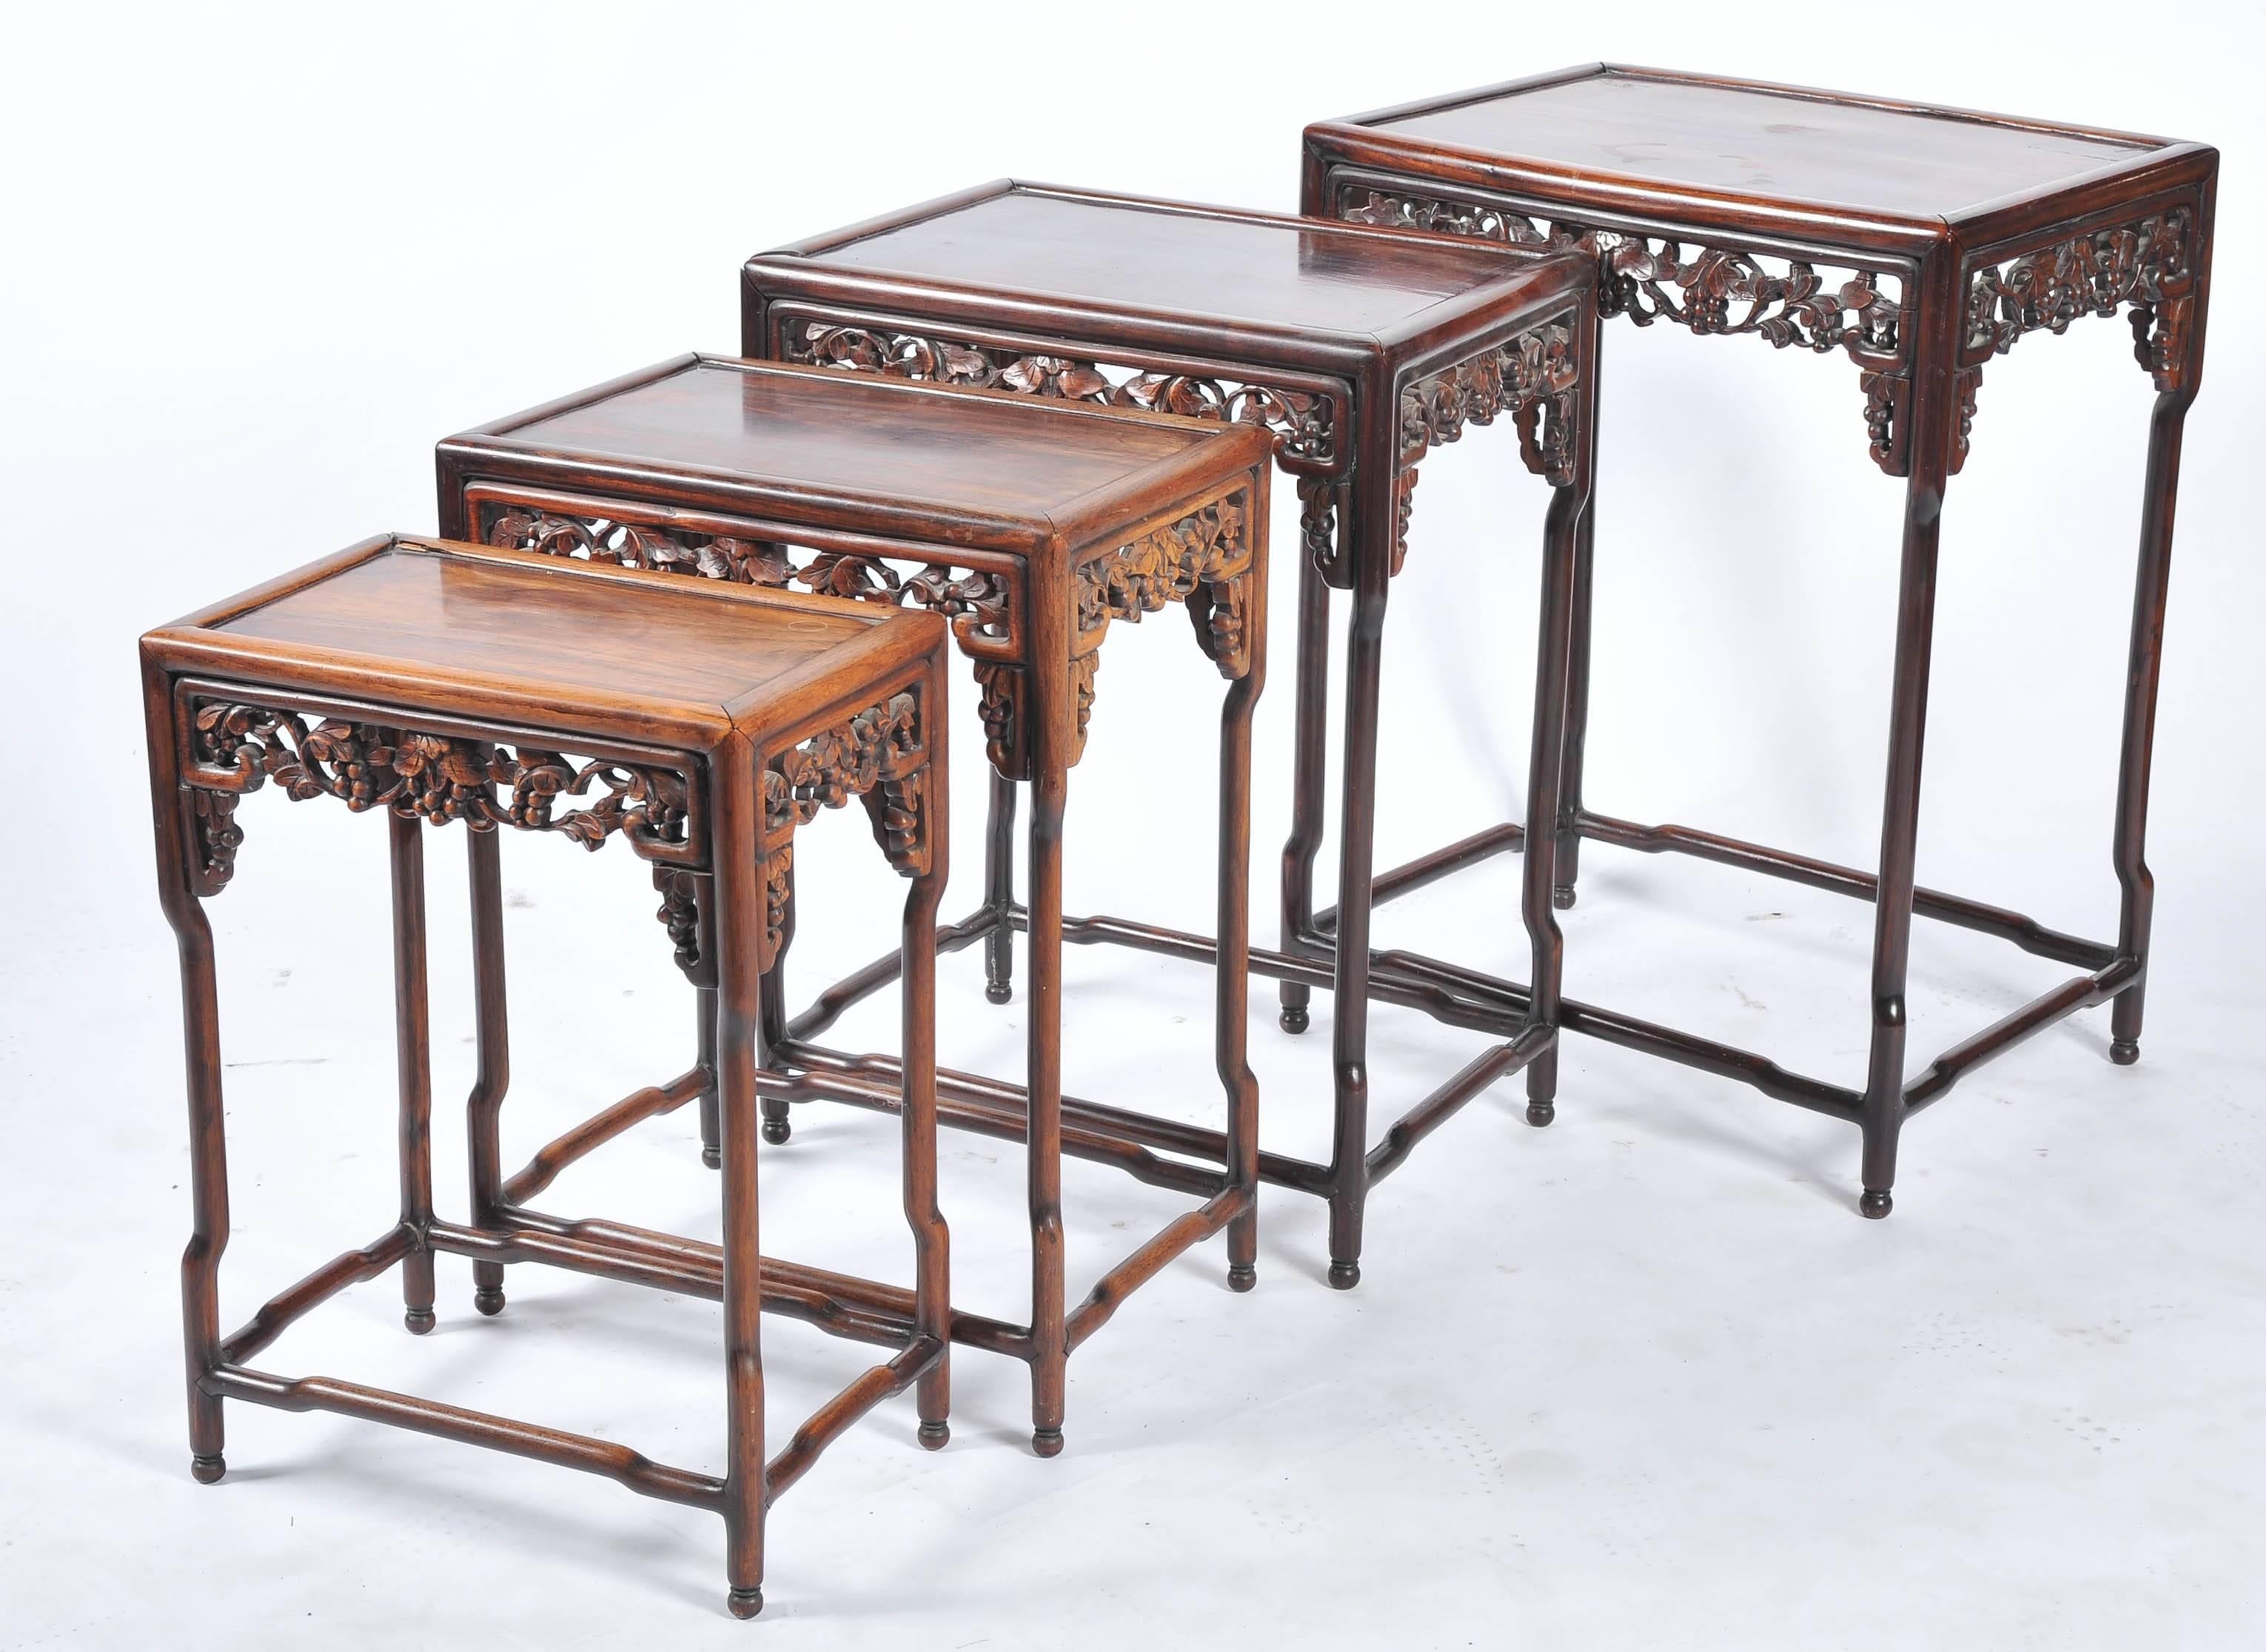 19th Century Chinese Hardwood Nest of Tables In Good Condition For Sale In Brighton, Sussex